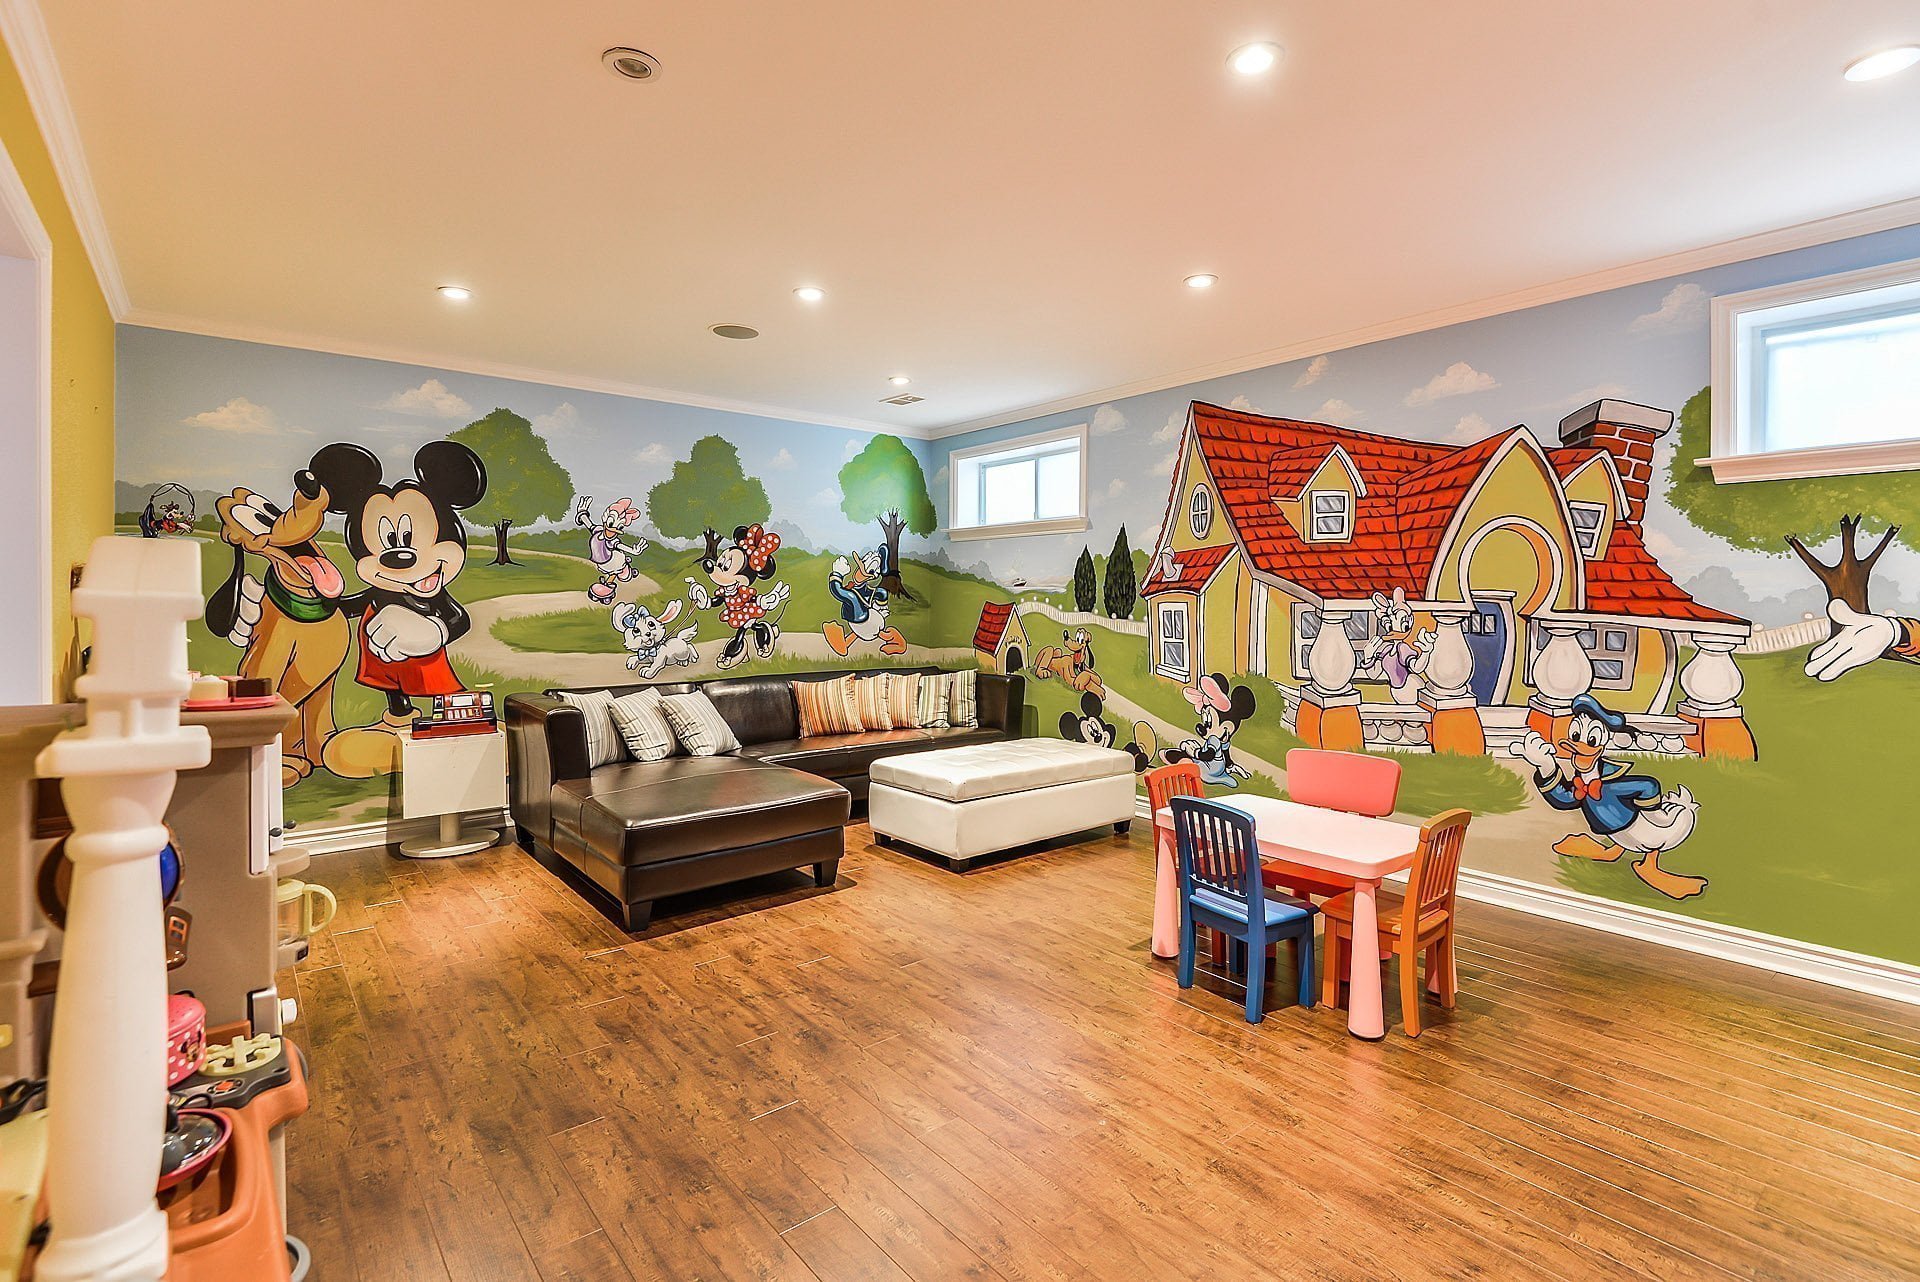 16 Adorable Cartoon Inspired Bedroom Design Ideas For Kids - Style